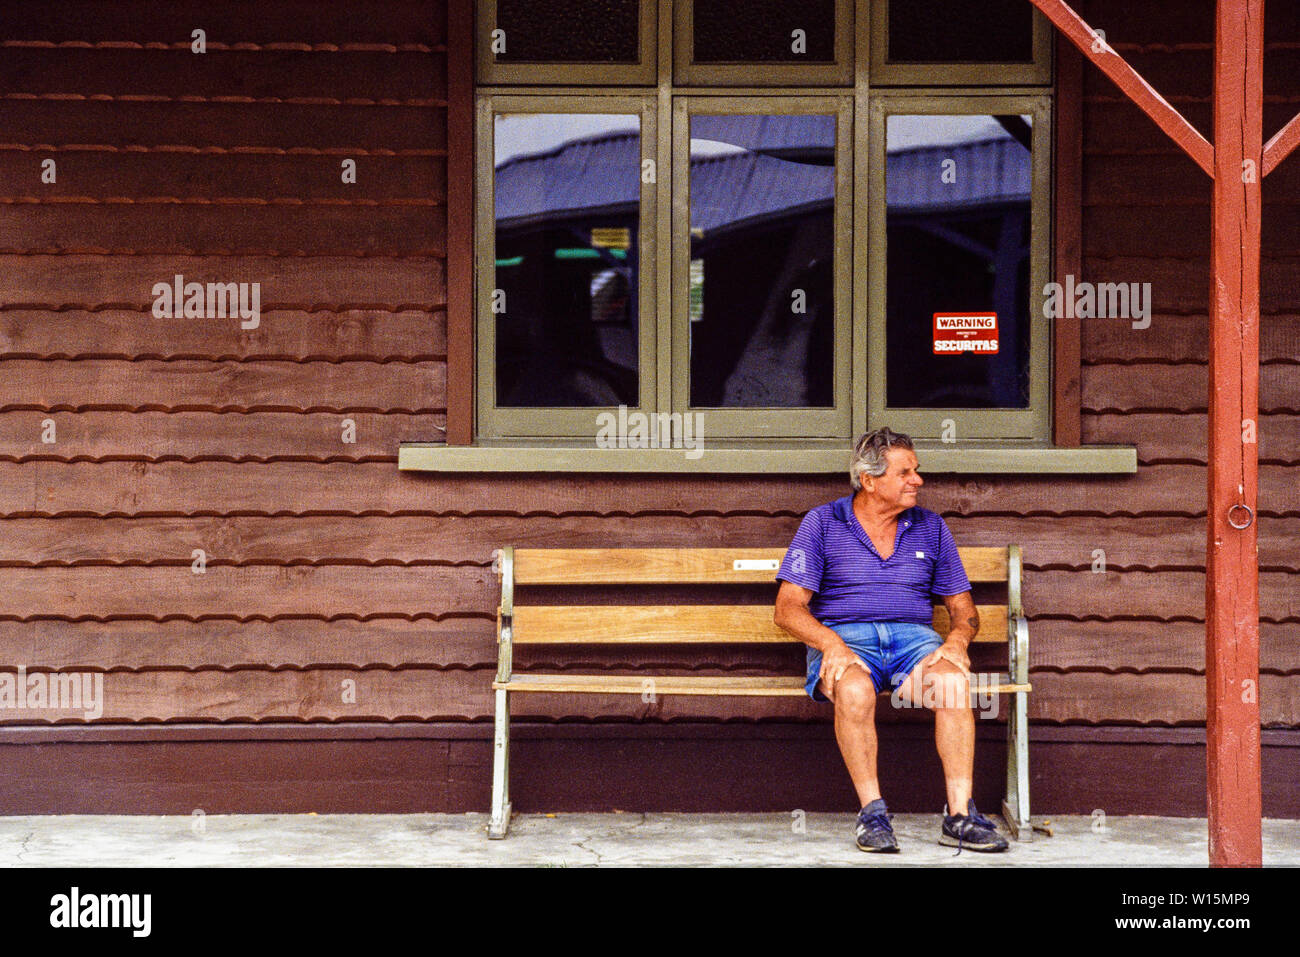 New Zealand, South Island, Arrowtown. A tourist takes a rest sitting on a bench. A historic gold mining town in the Otago region. Photo taken November Stock Photo